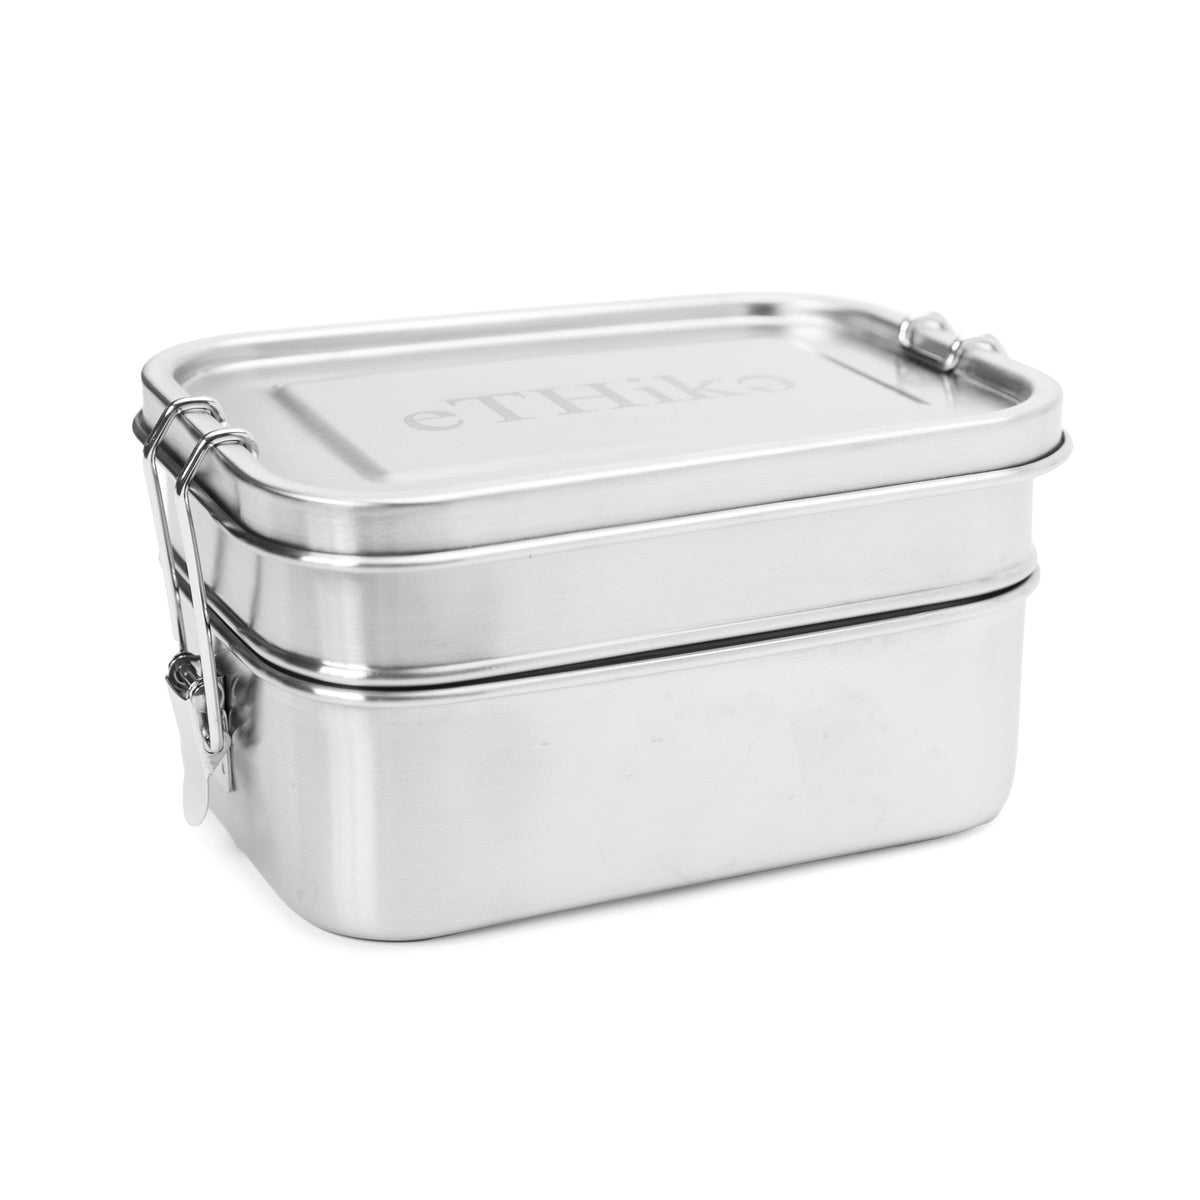 2 Compartment Small Divided Food Container – Ethika_Inc